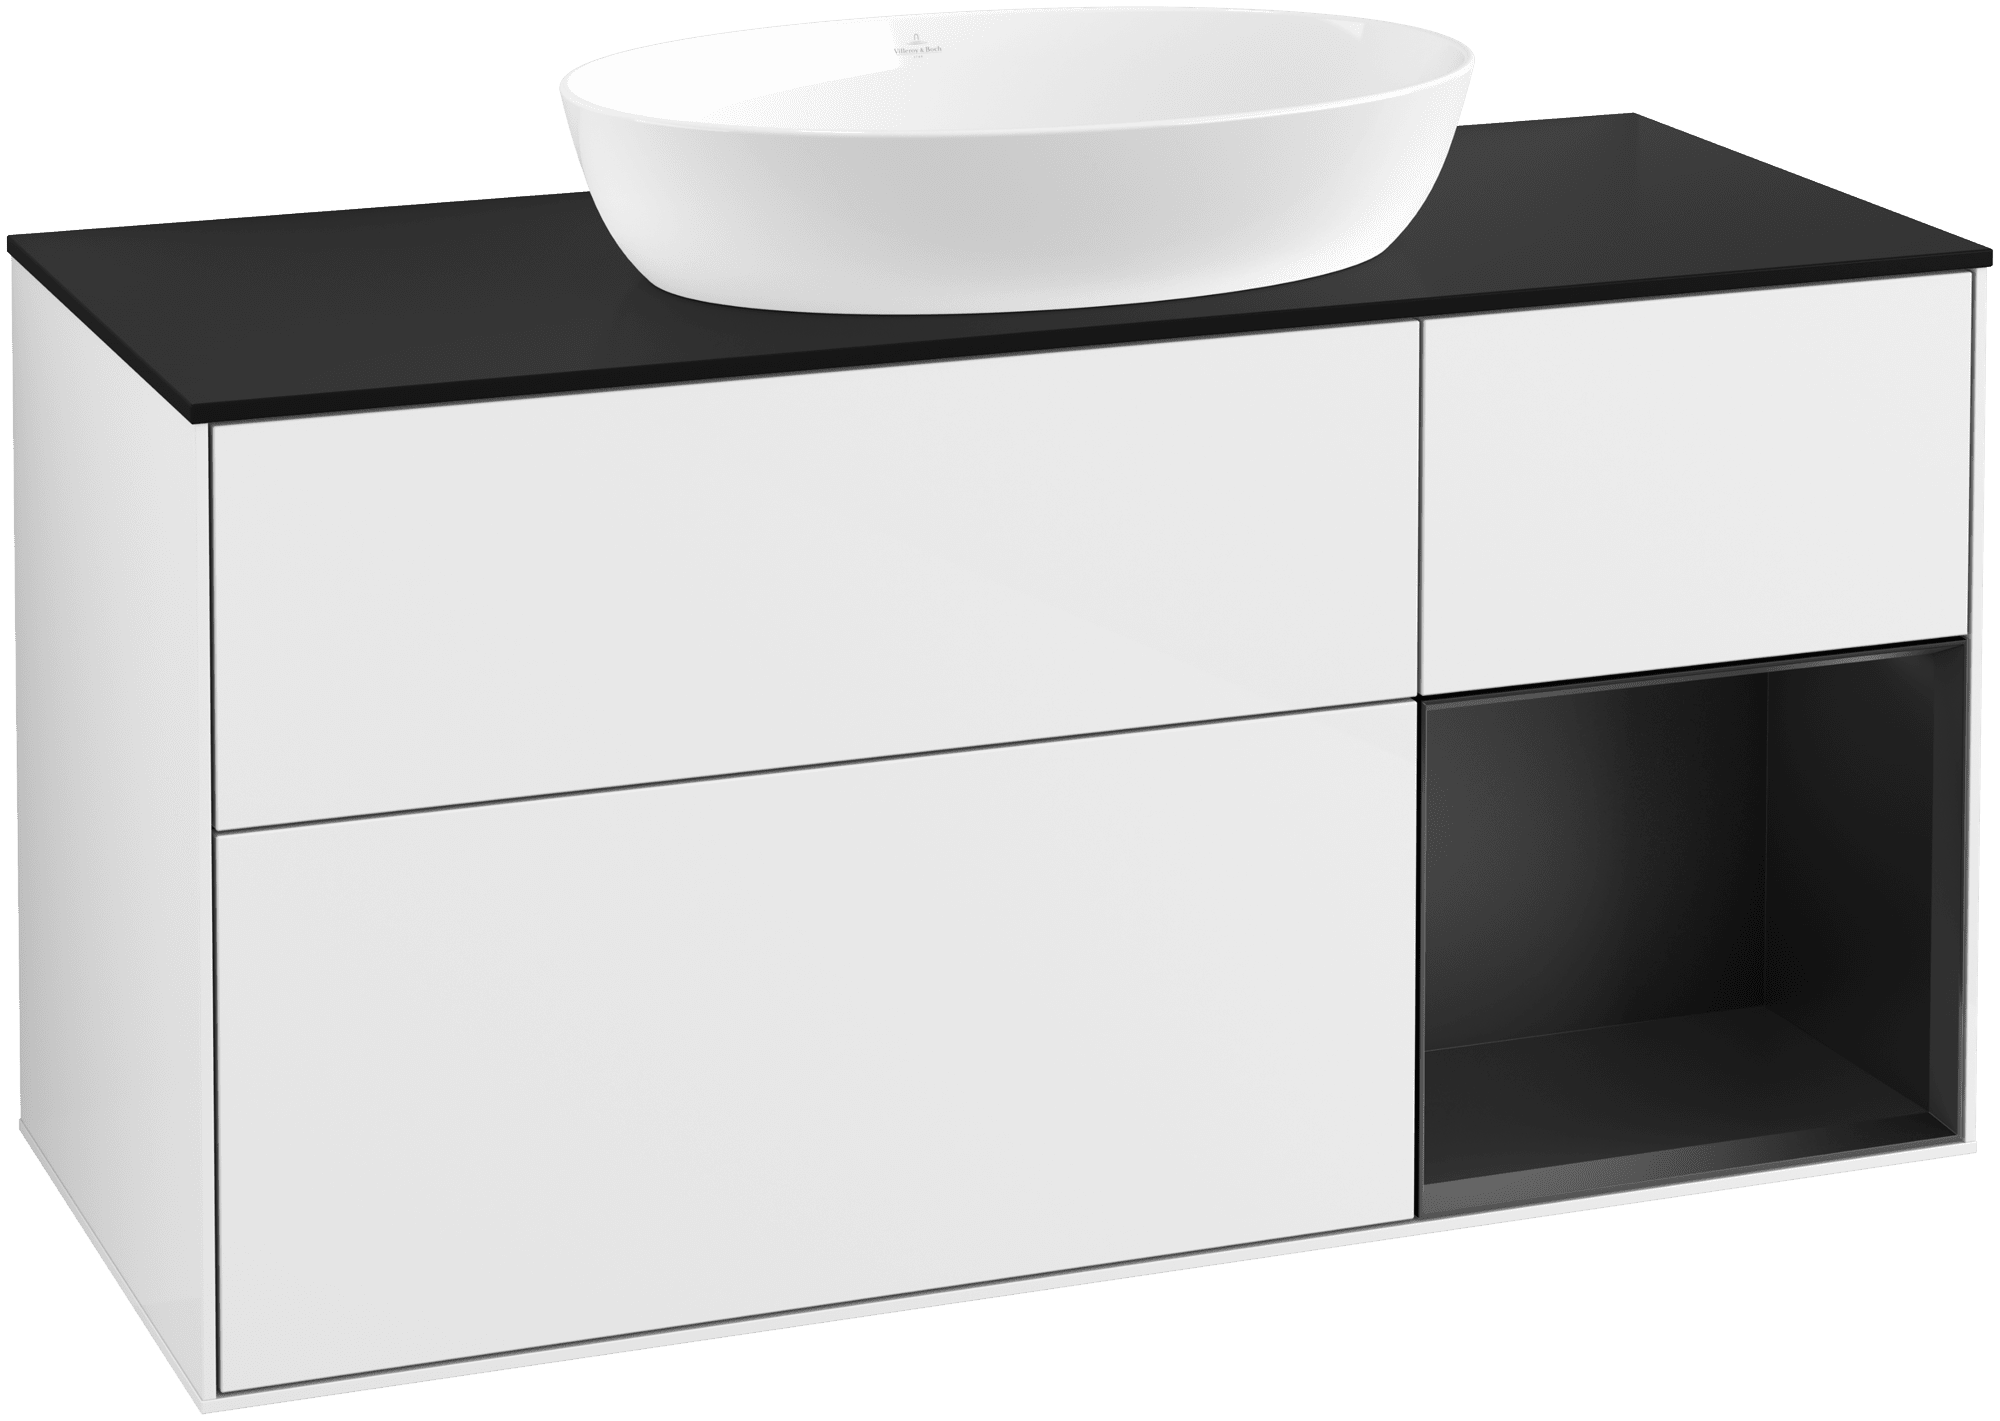 Picture of VILLEROY BOCH Finion Vanity unit, with lighting, 3 pull-out compartments, 1200 x 603 x 501 mm, Glossy White Lacquer / Black Matt Lacquer / Glass Black Matt #FA72PDGF